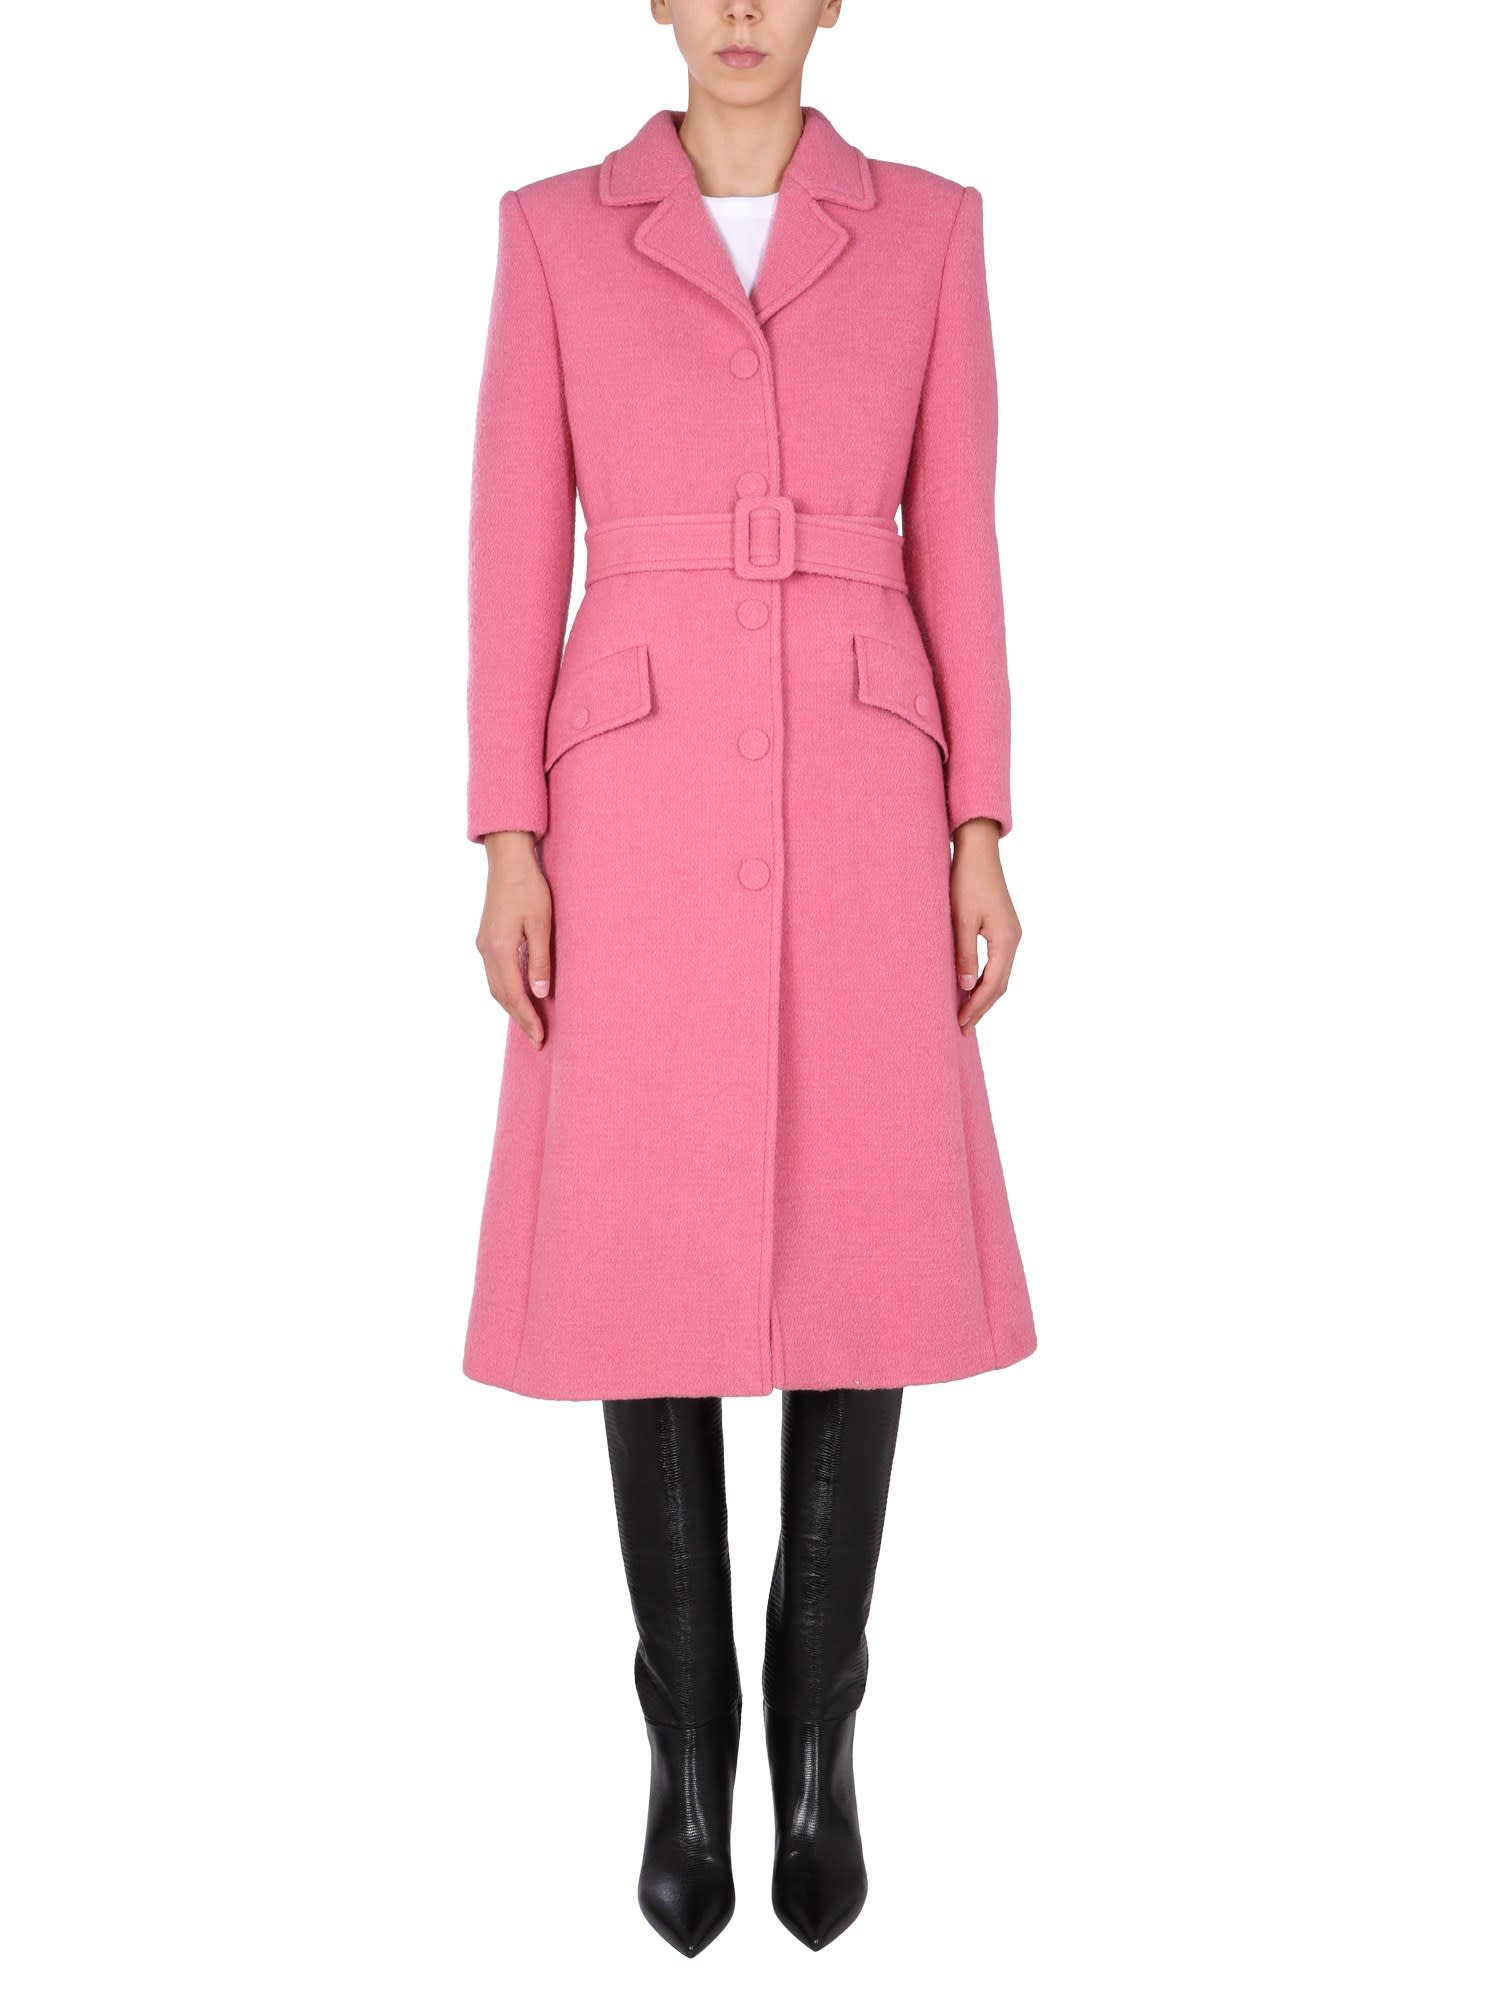 Boutique Moschino Single-breasted Coat With Waist Belt